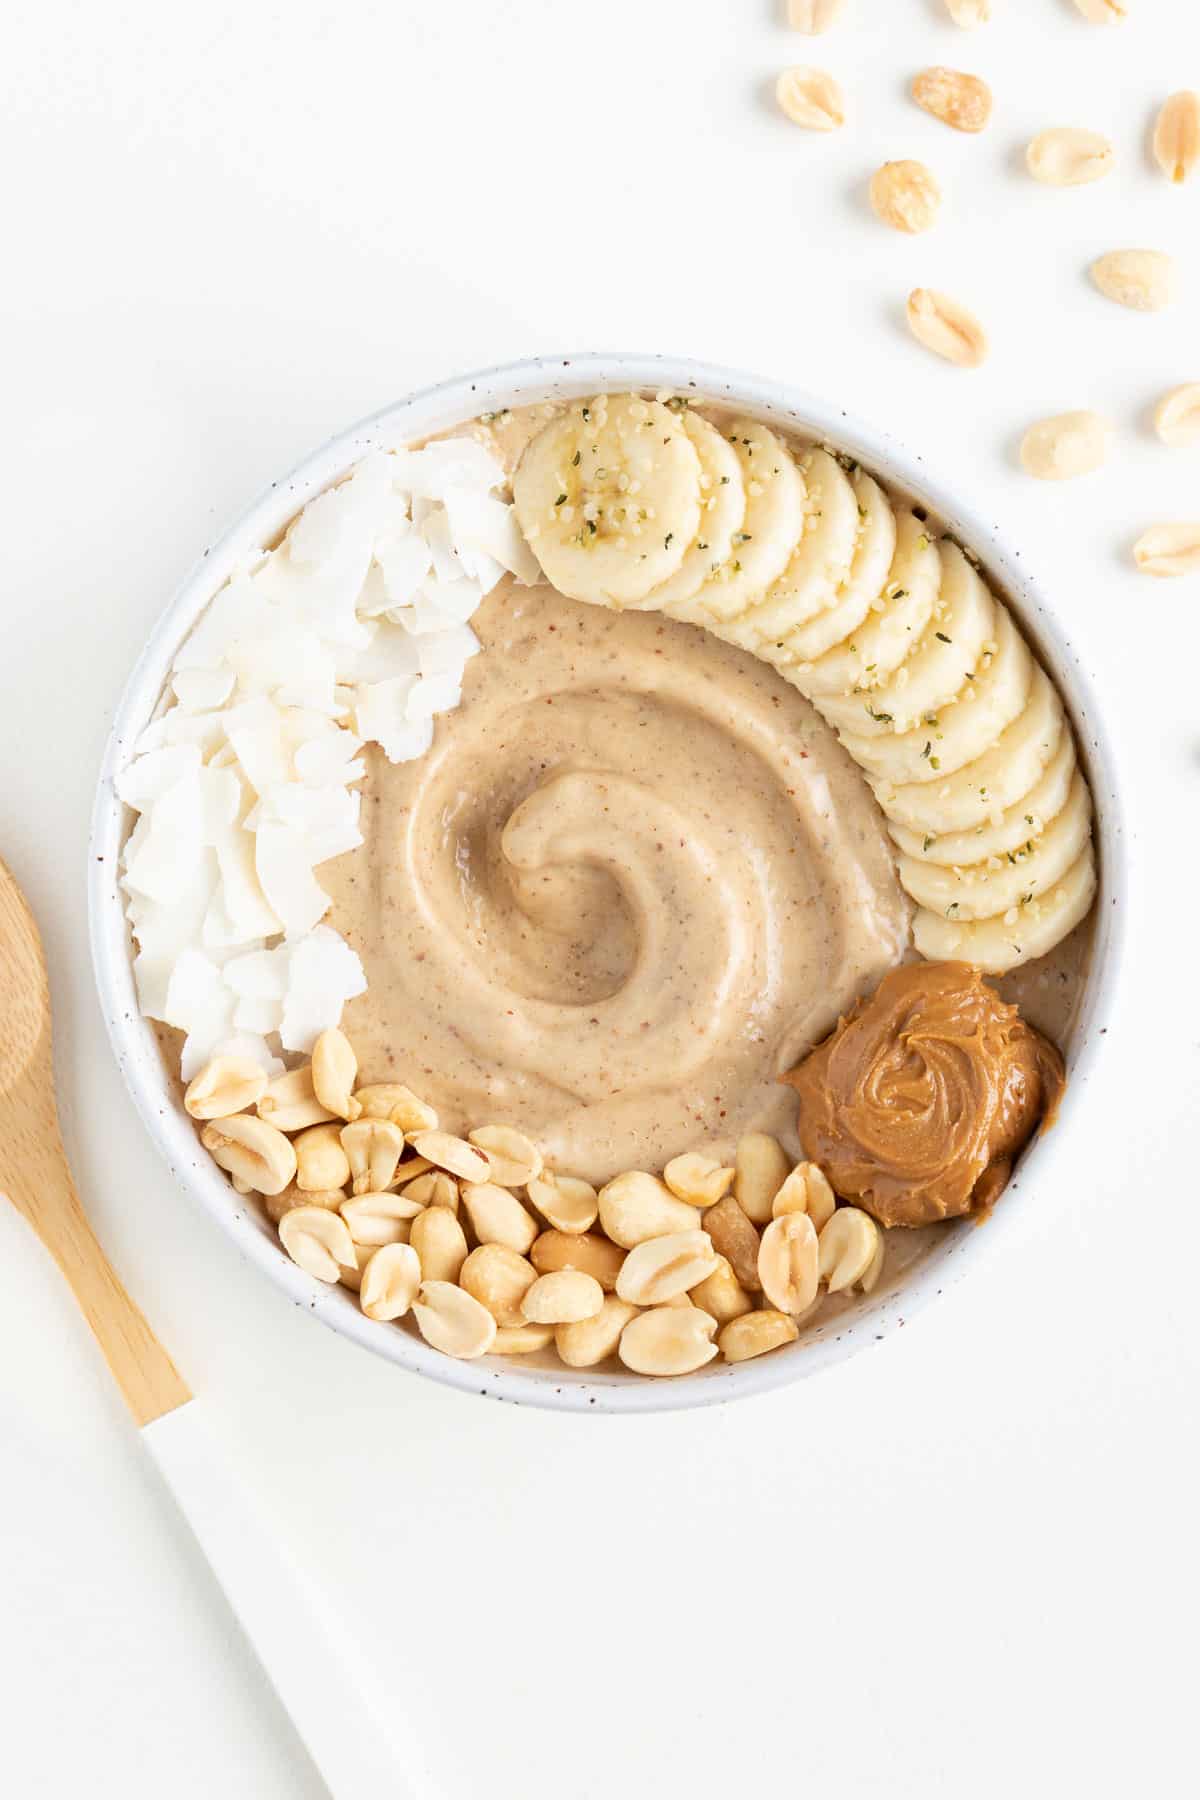 peanut butter banana smoothie bowl surrounded by chopped peanuts and a wooden spoon